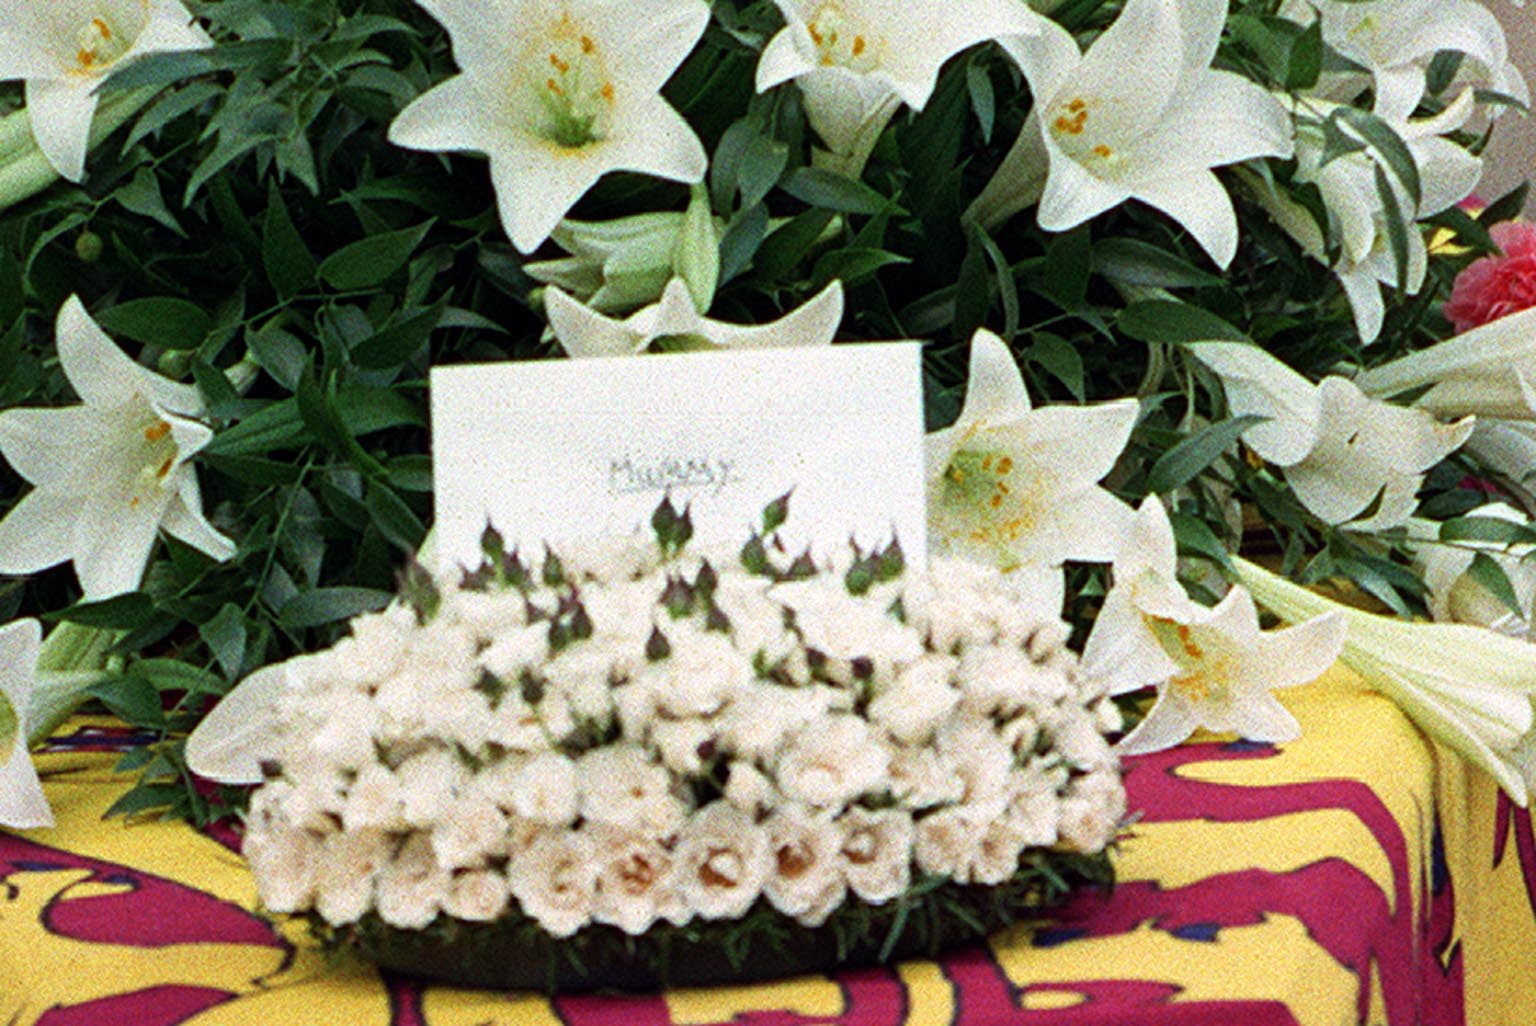 <p>A floral wreath with a heartbreaking card bearing the word "Mummy" was perched atop Princess Diana's draped casket as it left Westminster Abbey in London following her funeral on Sept. 6, 1997.</p>